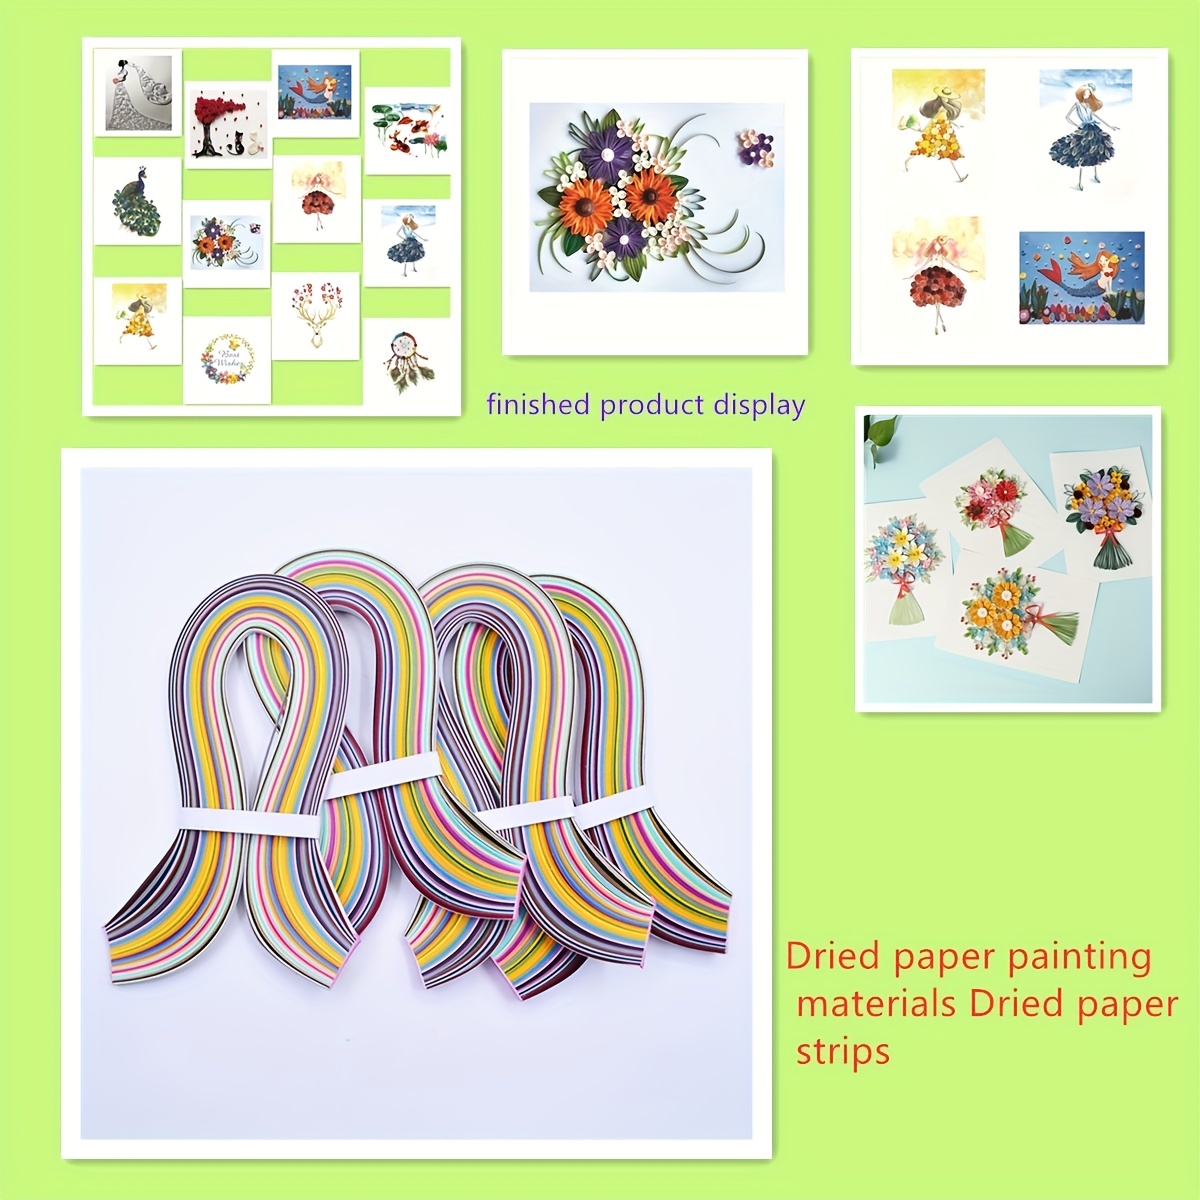 Quilling Kit, Quilling Paper Strips and Tools Supplies for Beginners